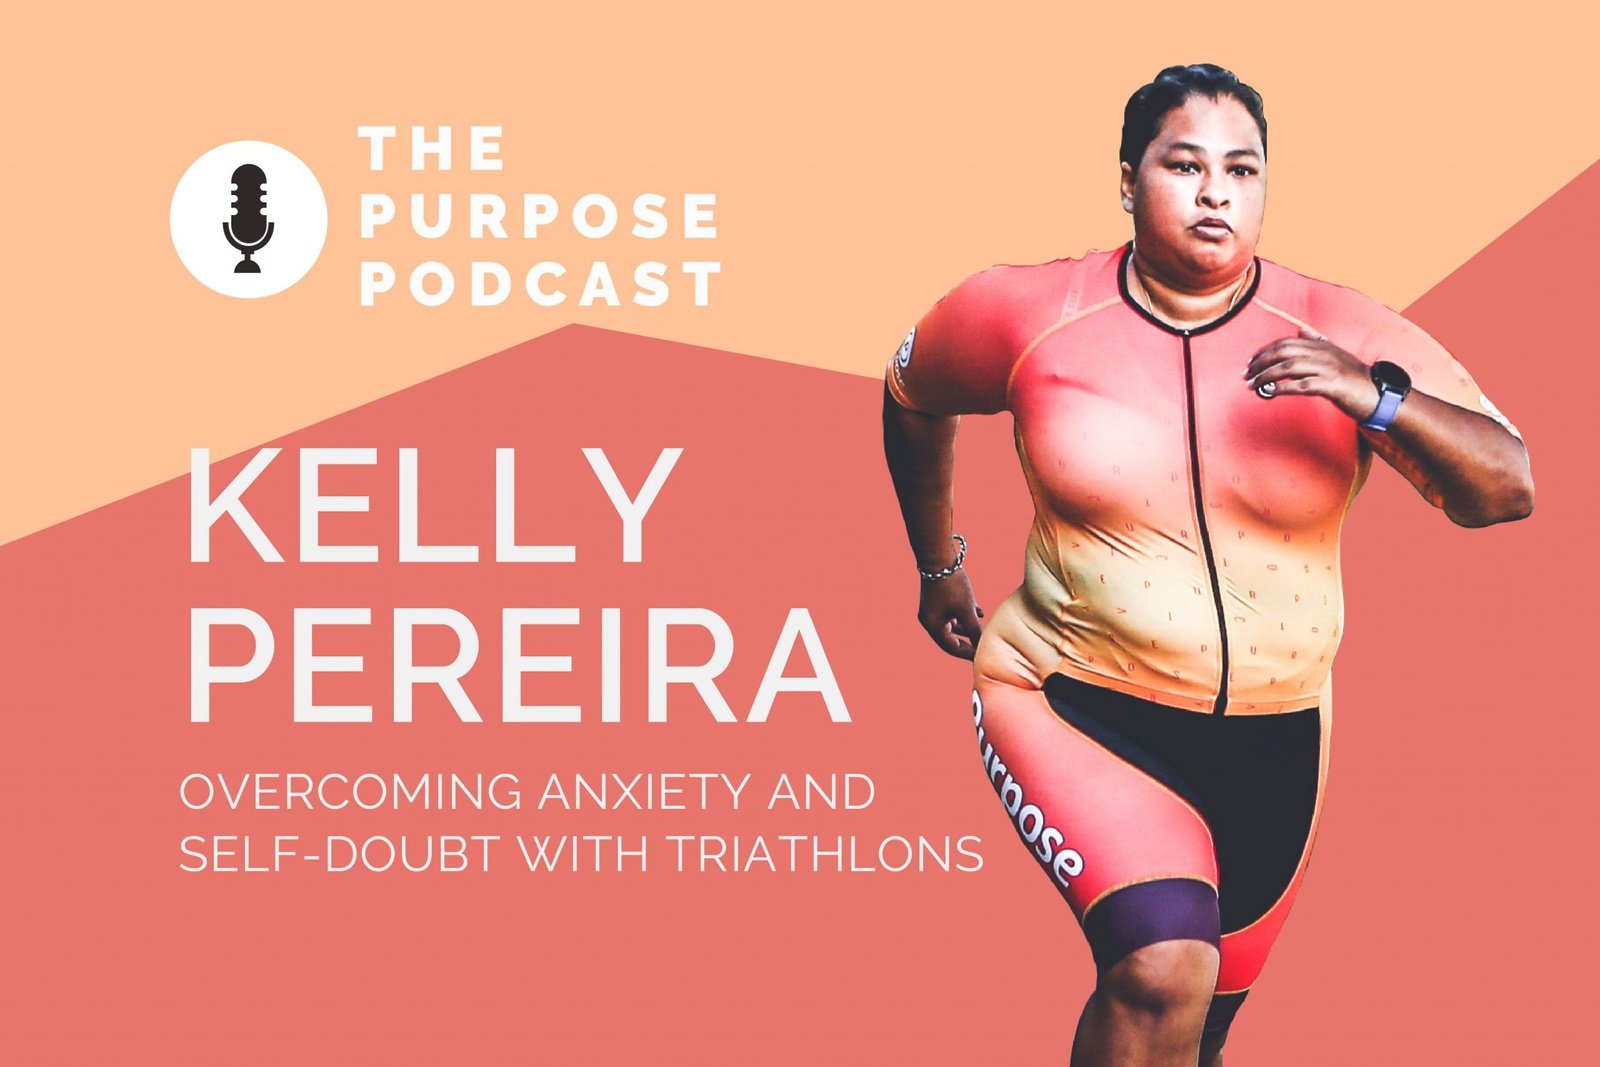 The PURPOSE Podcast 12: Kelly Pereira, on overcoming anxiety and self-doubt with triathlons